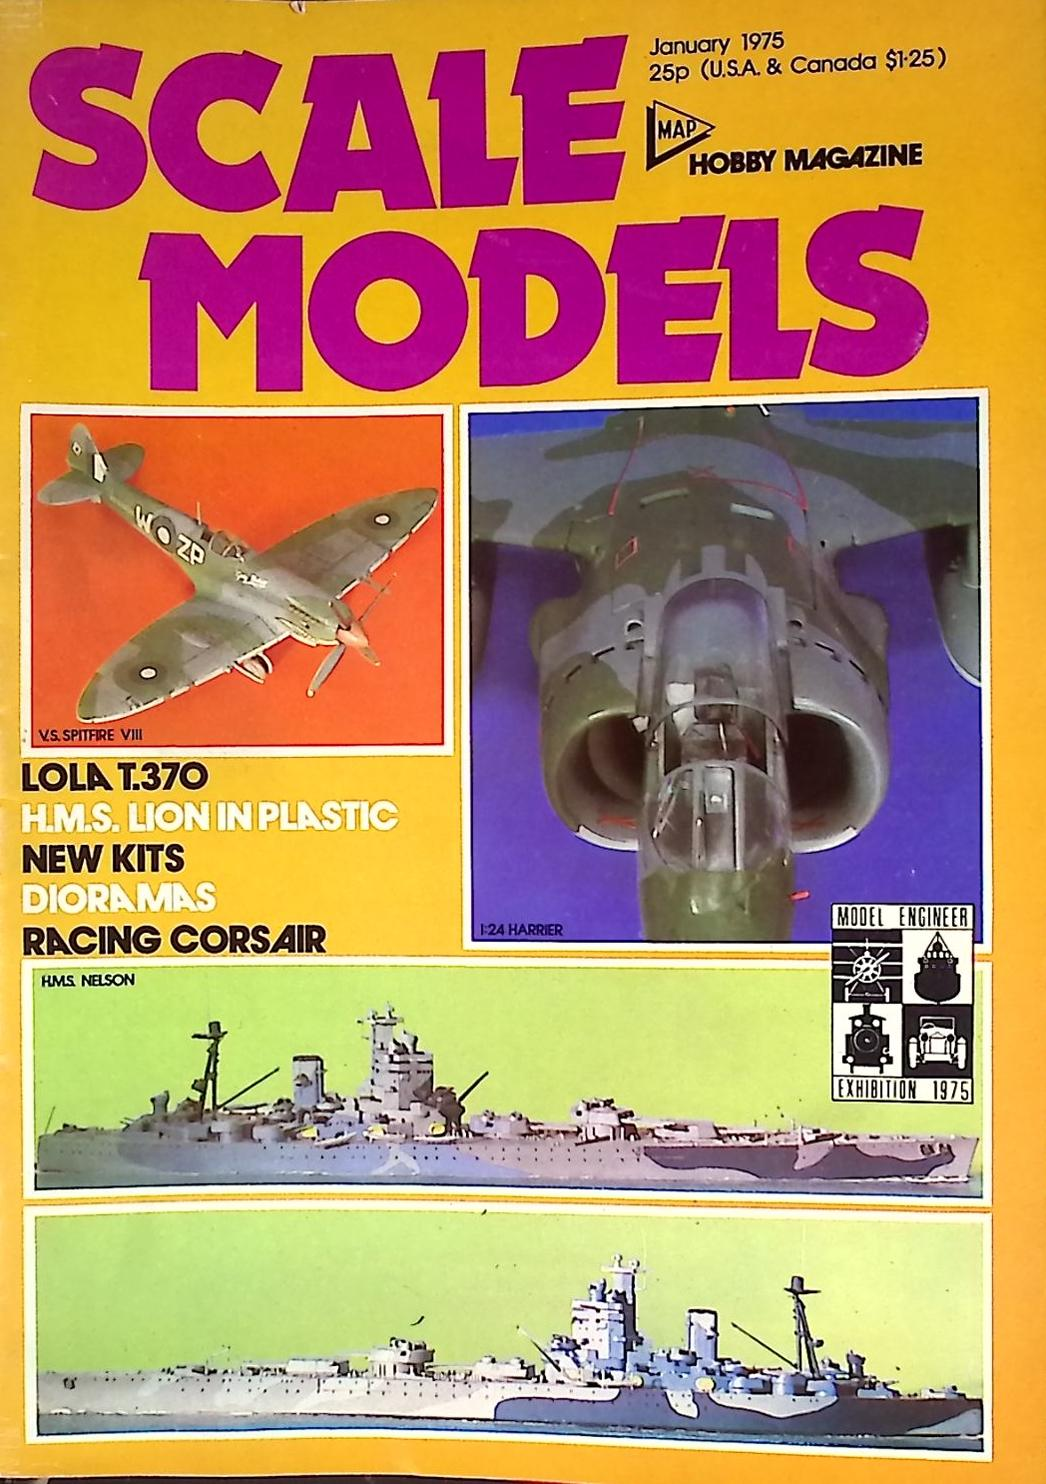 Scale Models. MAP Hobby Magazine. Volume 6. January to December 1975.